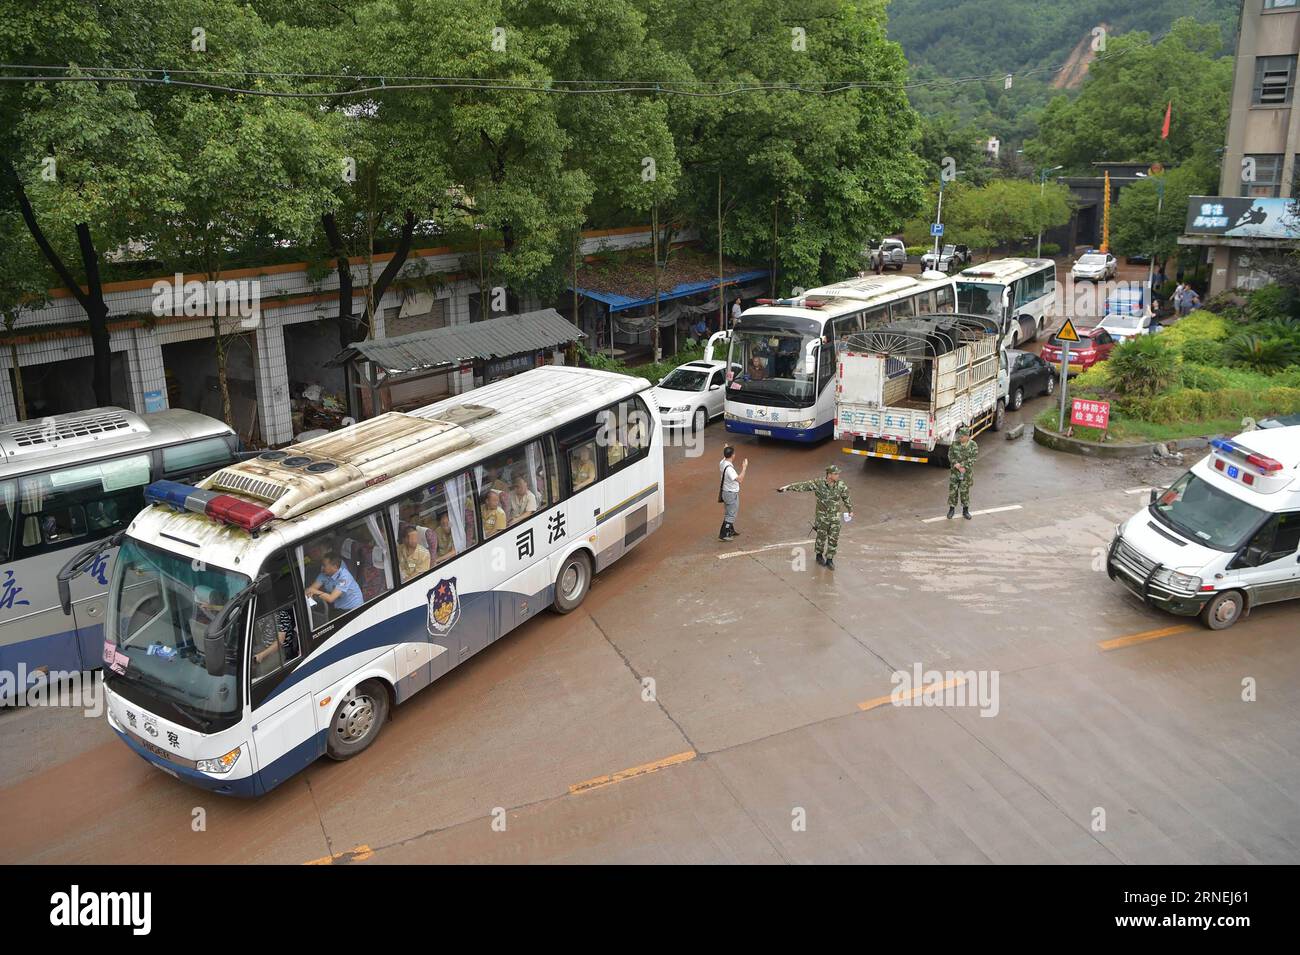 (160624) -- CHONGQING, June 24, 2016 -- Police vehicles carrying prisoners set off from Yuxi Prison in Yongchuan of Chongqing, southwest China, June 24, 2016. Heavy rain on Thursday night flooded a section of the outer wall of Yuxi Prison forcing the relocation of 1,400 inmates over night. The prison authority has reinforced security and ensured provisions. )(mcg/yxb) CHINA-CHONGQING-HEAVY RAIN-PRISONER-RELOCATION (CN) ChenxCheng PUBLICATIONxNOTxINxCHN   160624 Chongqing June 24 2016 Police VEHICLES carrying Prisoners Set off from Yuxi Prison in Chuan Yong of Chongqing Southwest China June 24 Stock Photo